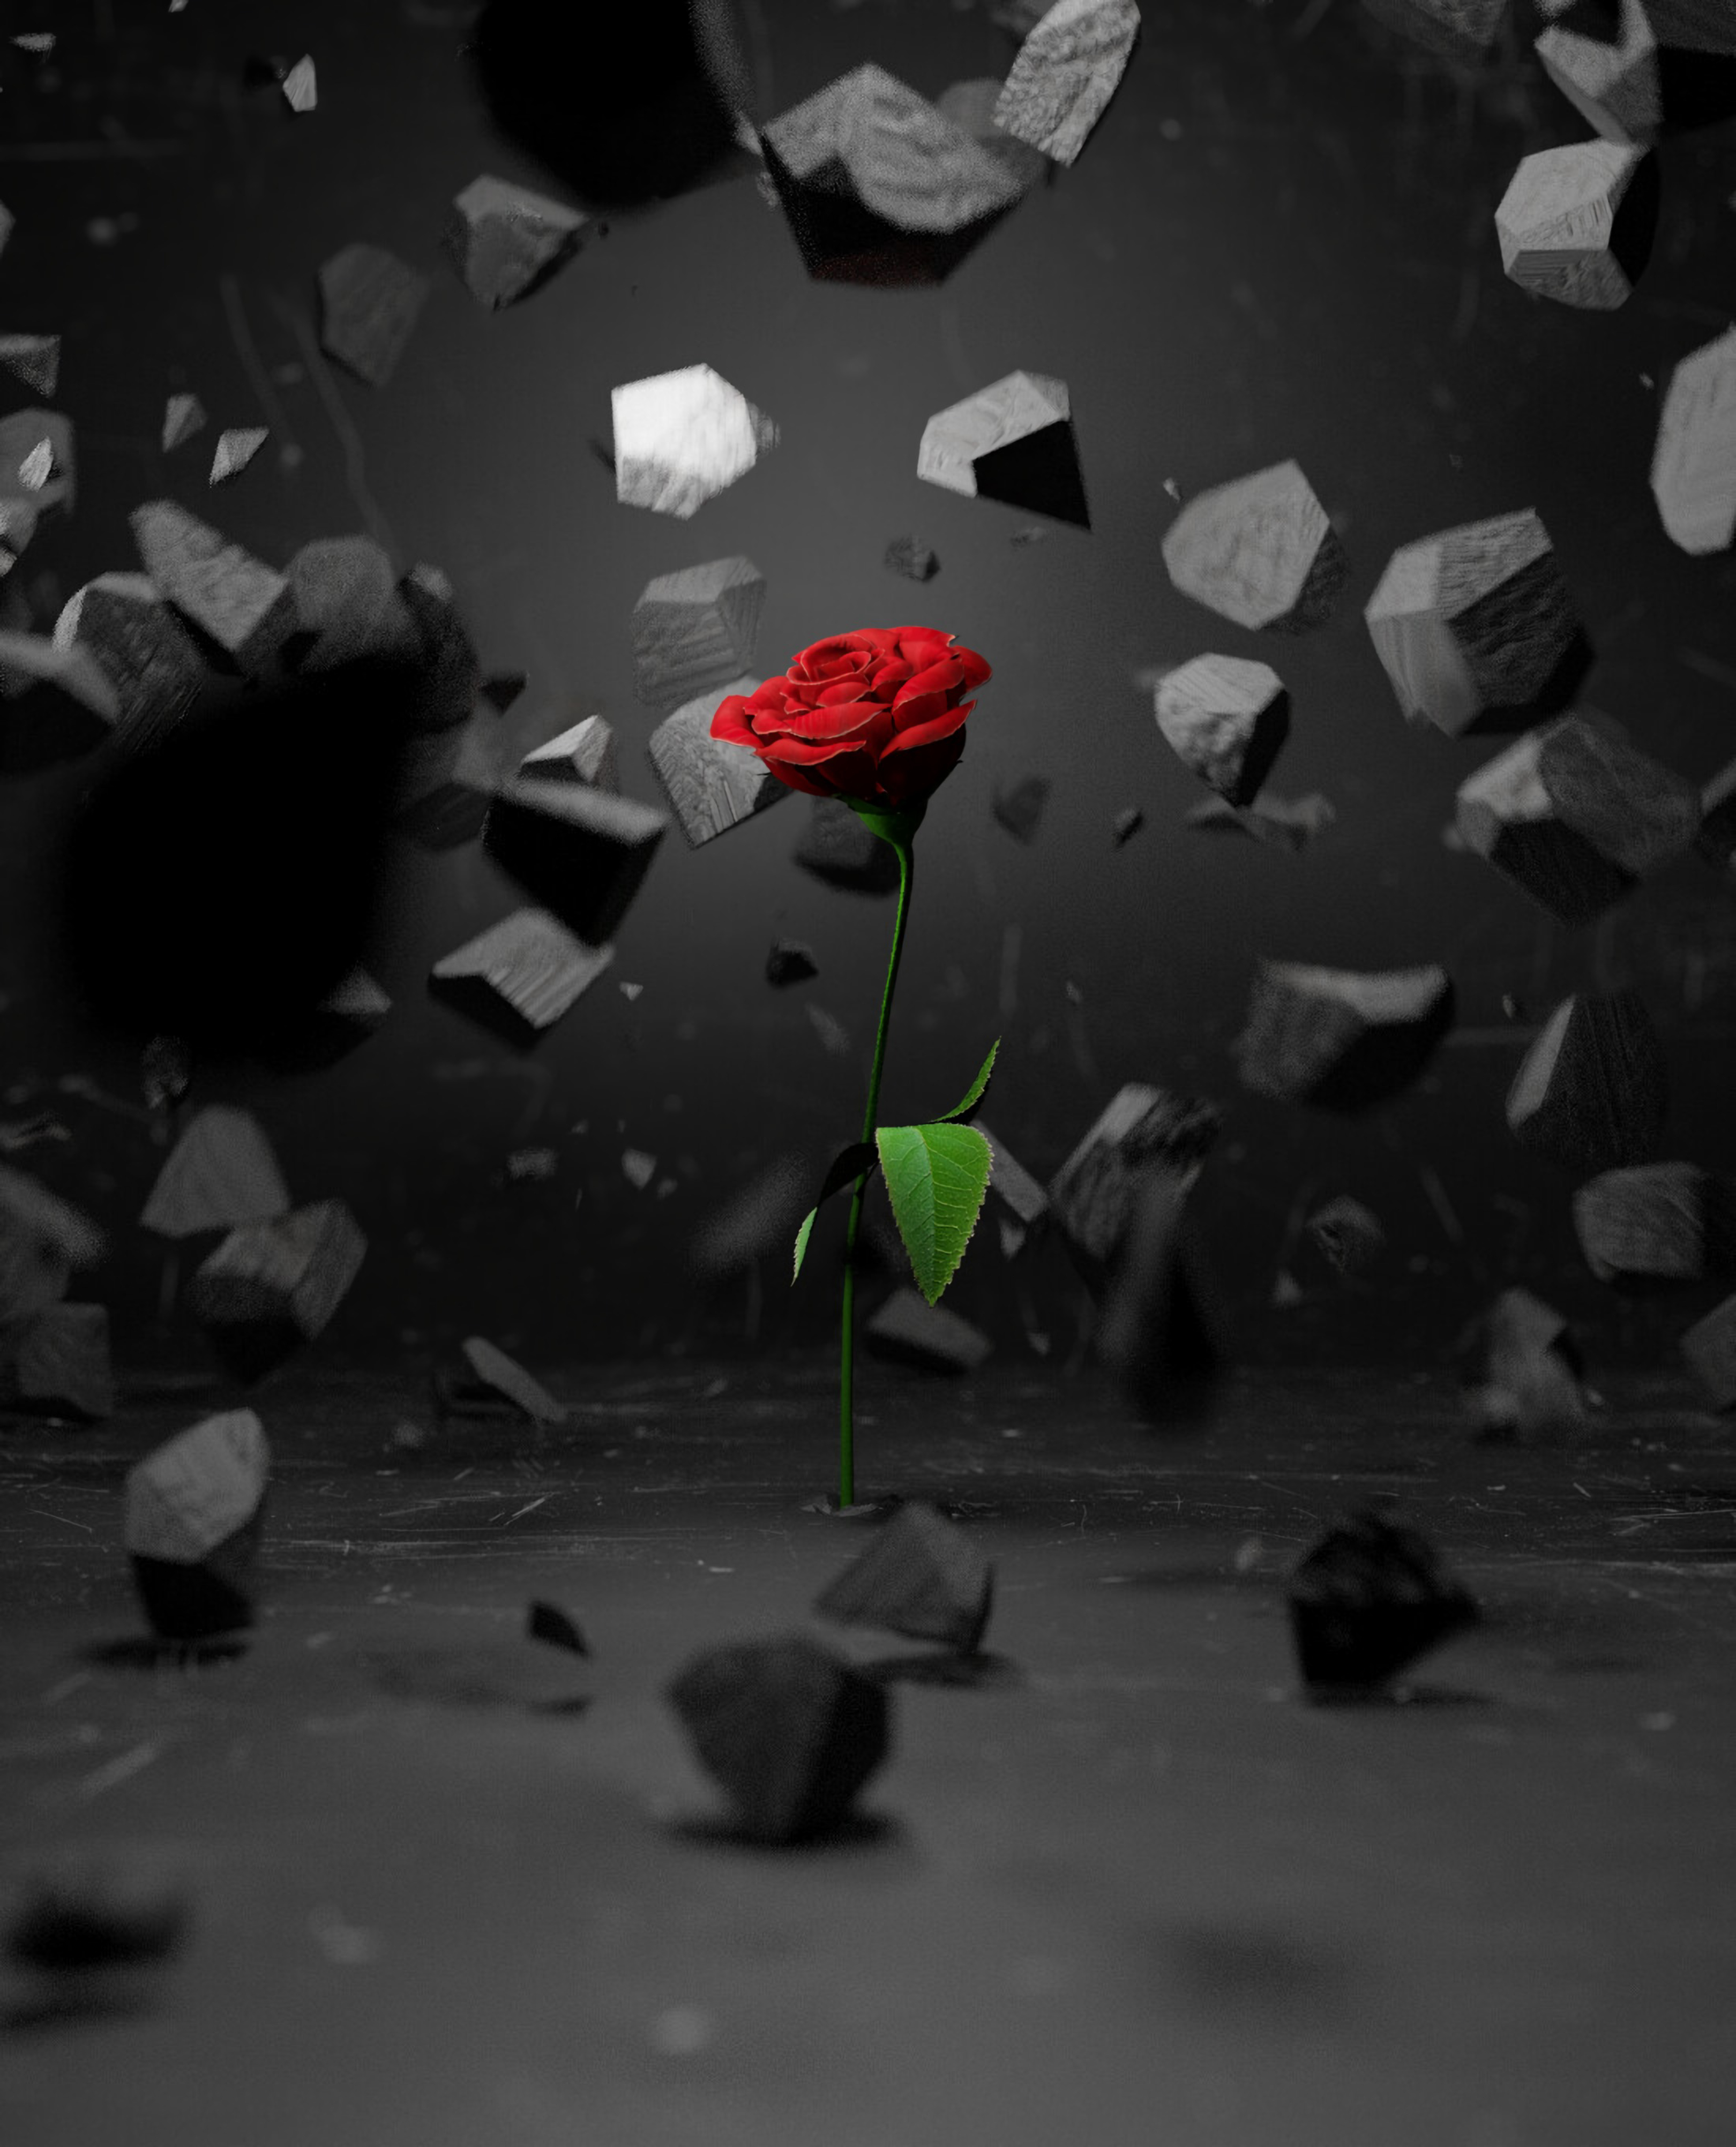 3d, stones, rose, rose flower, flower, smithereens, red, shards QHD